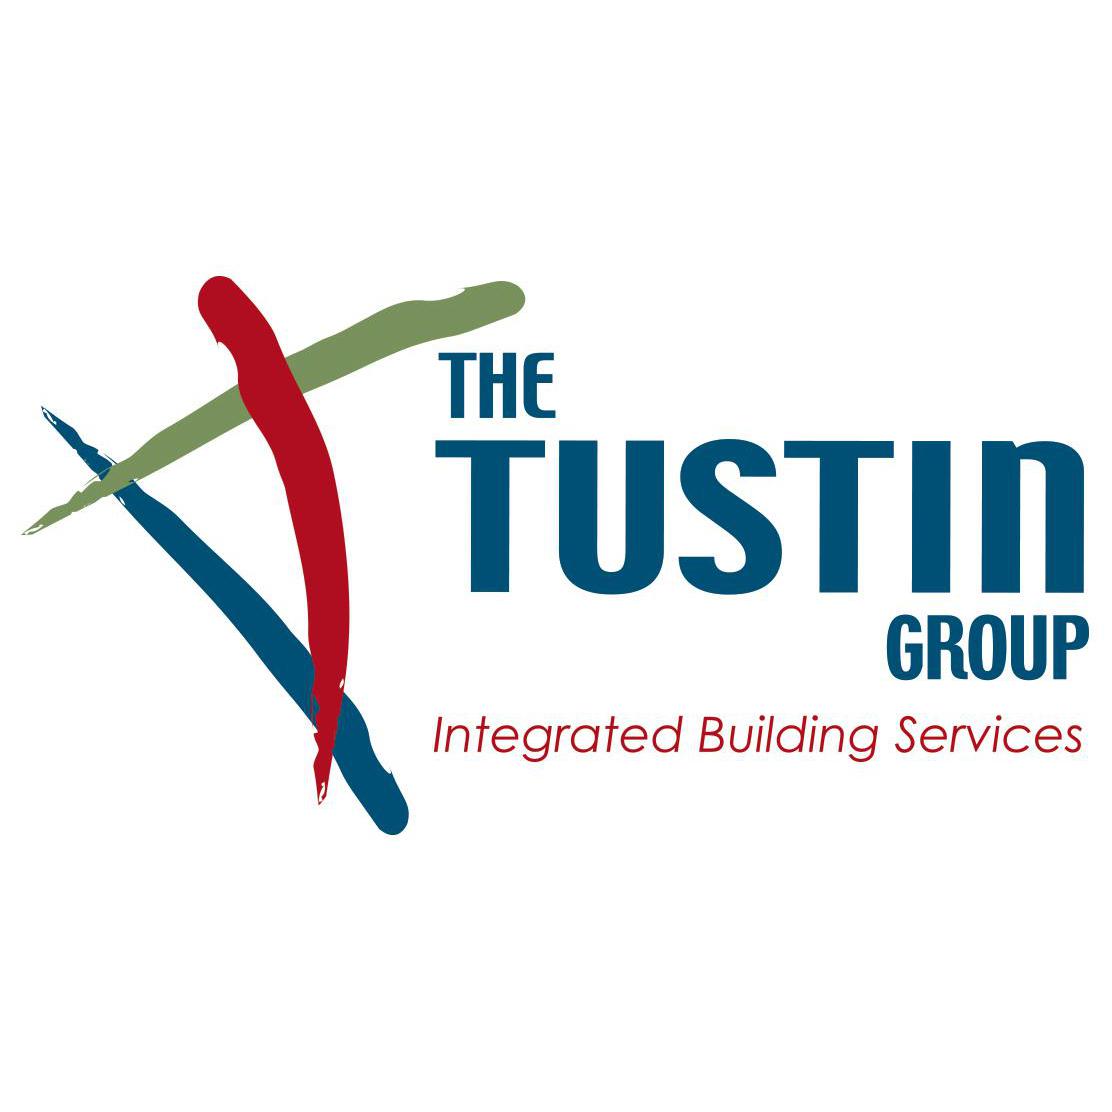 The Tustin Group